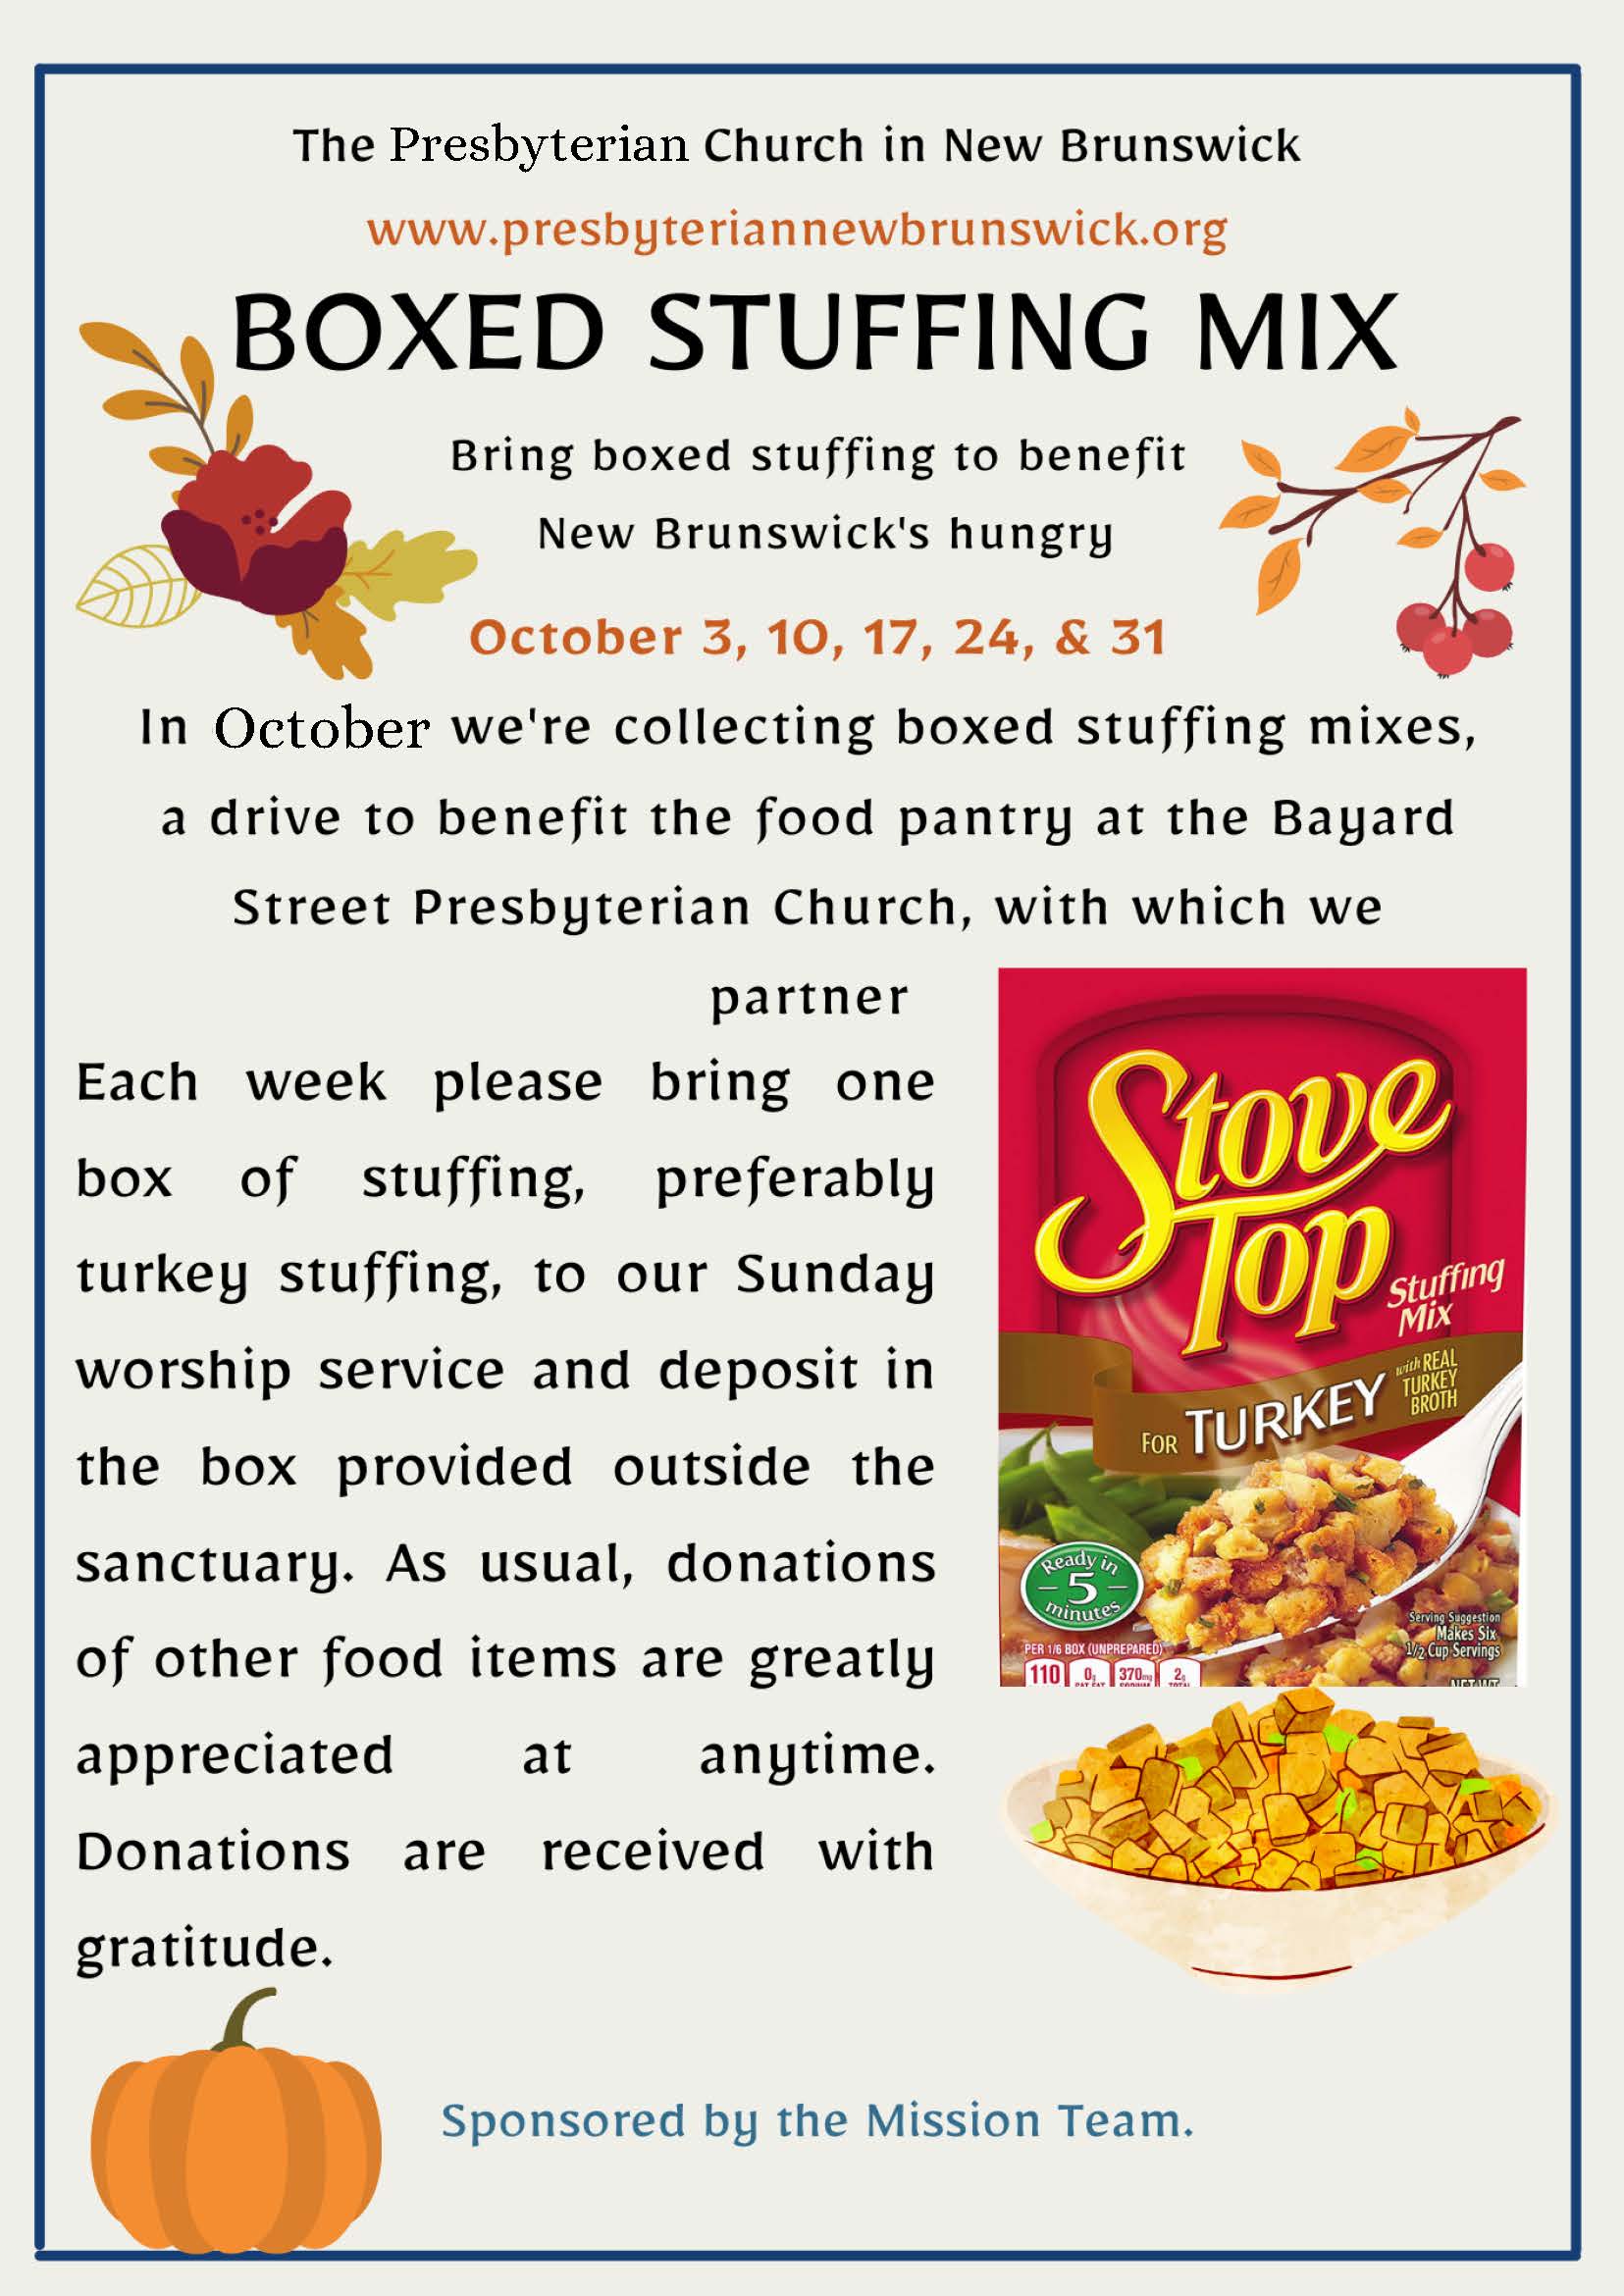 Box Stuffing Event Flyer Oct 3-31, 2021